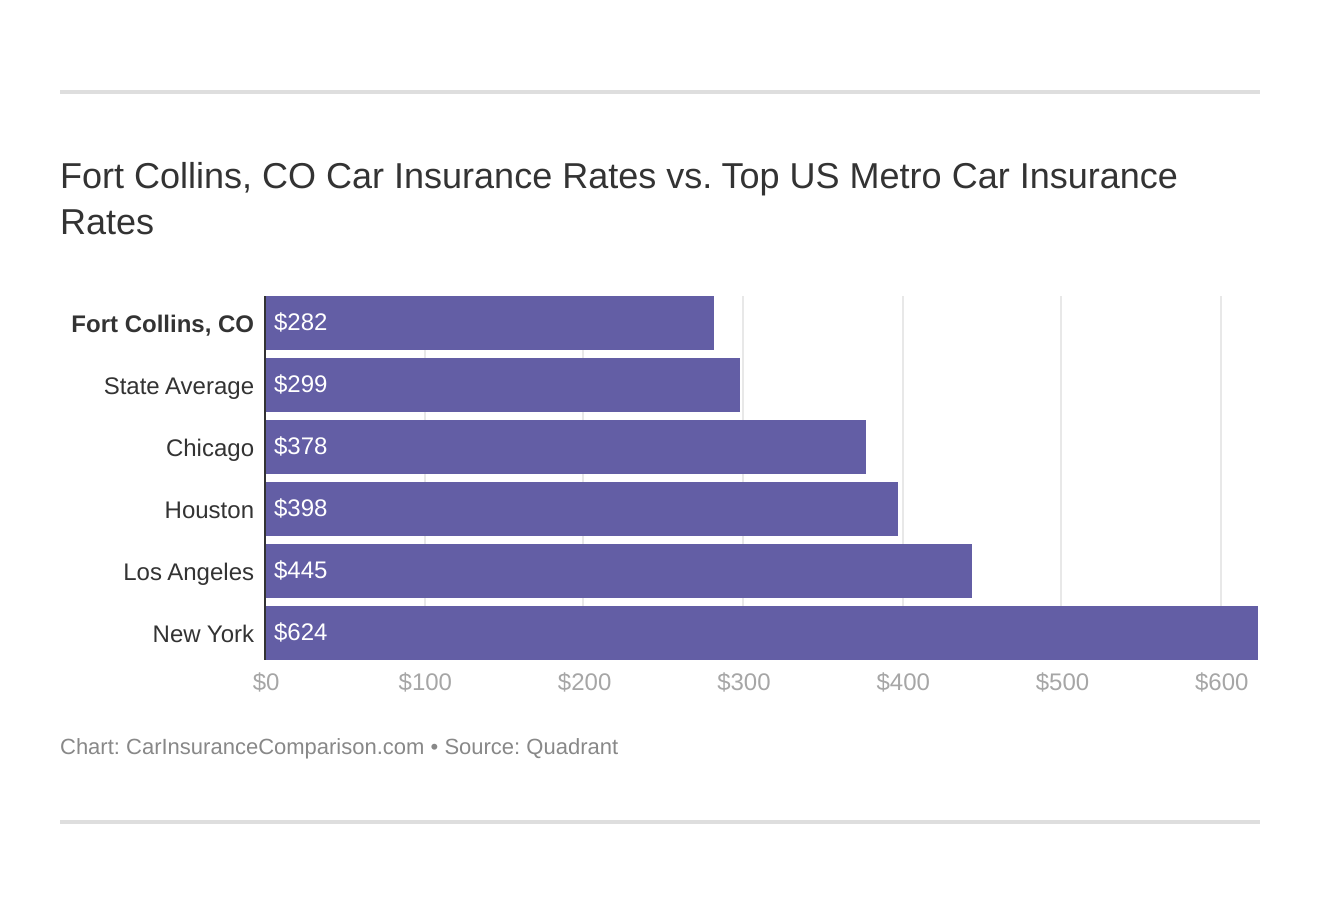 Fort Collins, CO Car Insurance Rates vs. Top US Metro Car Insurance Rates